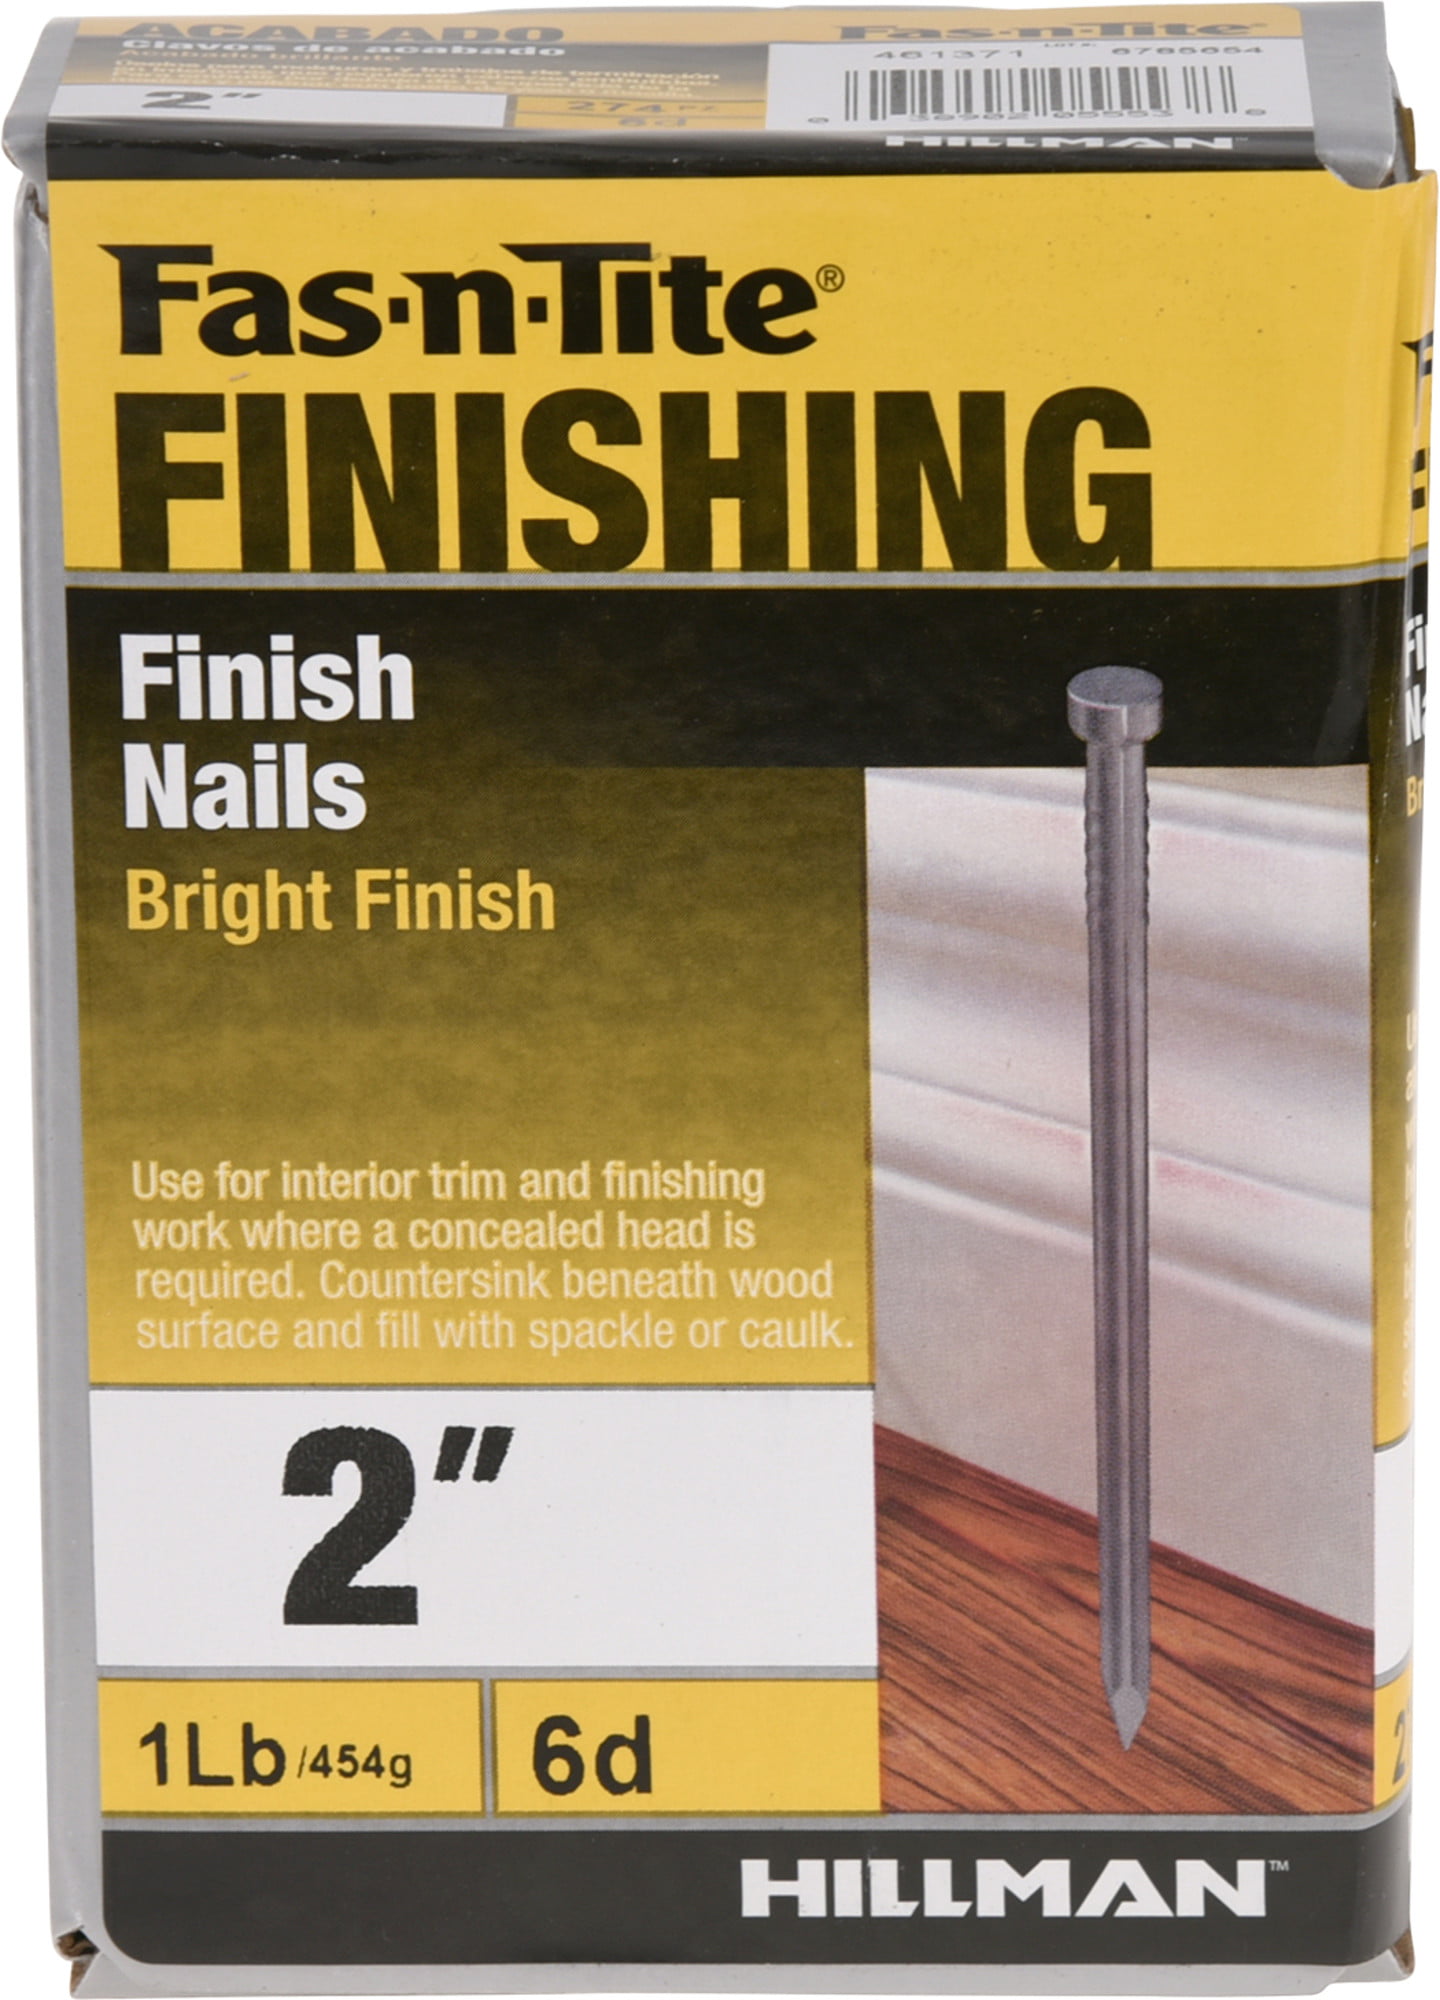 HAND DRIVE 6d  BRITE FINISH NAILS 5# 91 cents a pound  SHIPPING DISCOUNT on QTY 